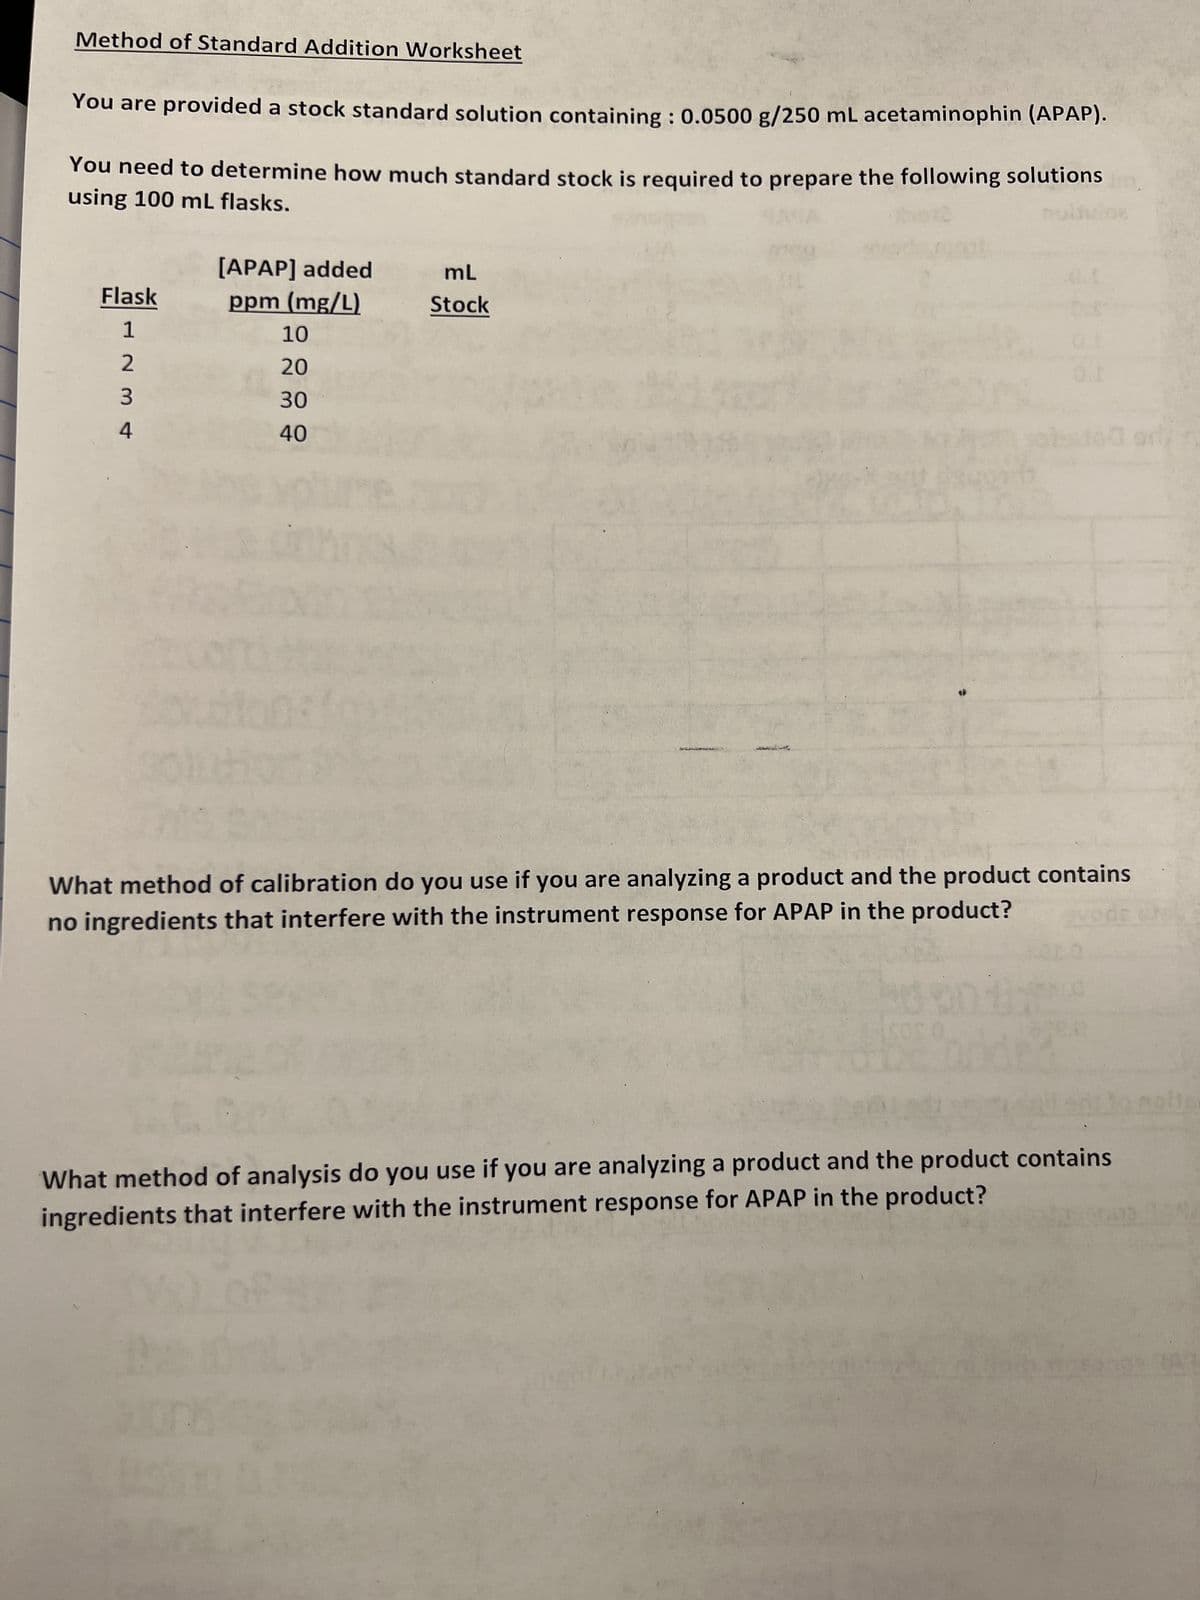 Method of Standard Addition Worksheet
You are provided a stock standard solution containing : 0.0500 g/250 mL acetaminophin (APAP).
You need to determine how much standard stock is required to prepare the following solutions
using 100 mL flasks.
Flask
12
3
4
[APAP] added
ppm (mg/L)
t
10
20
30
40
RI
mL
Stock
0.1
What method of calibration do you use if you are analyzing a product and the product contains
no ingredients that interfere with the instrument response for APAP in the product?
on th
LI
What method of analysis do you use if you are analyzing a product and the product contains
ingredients that interfere with the instrument response for APAP in the product?
or